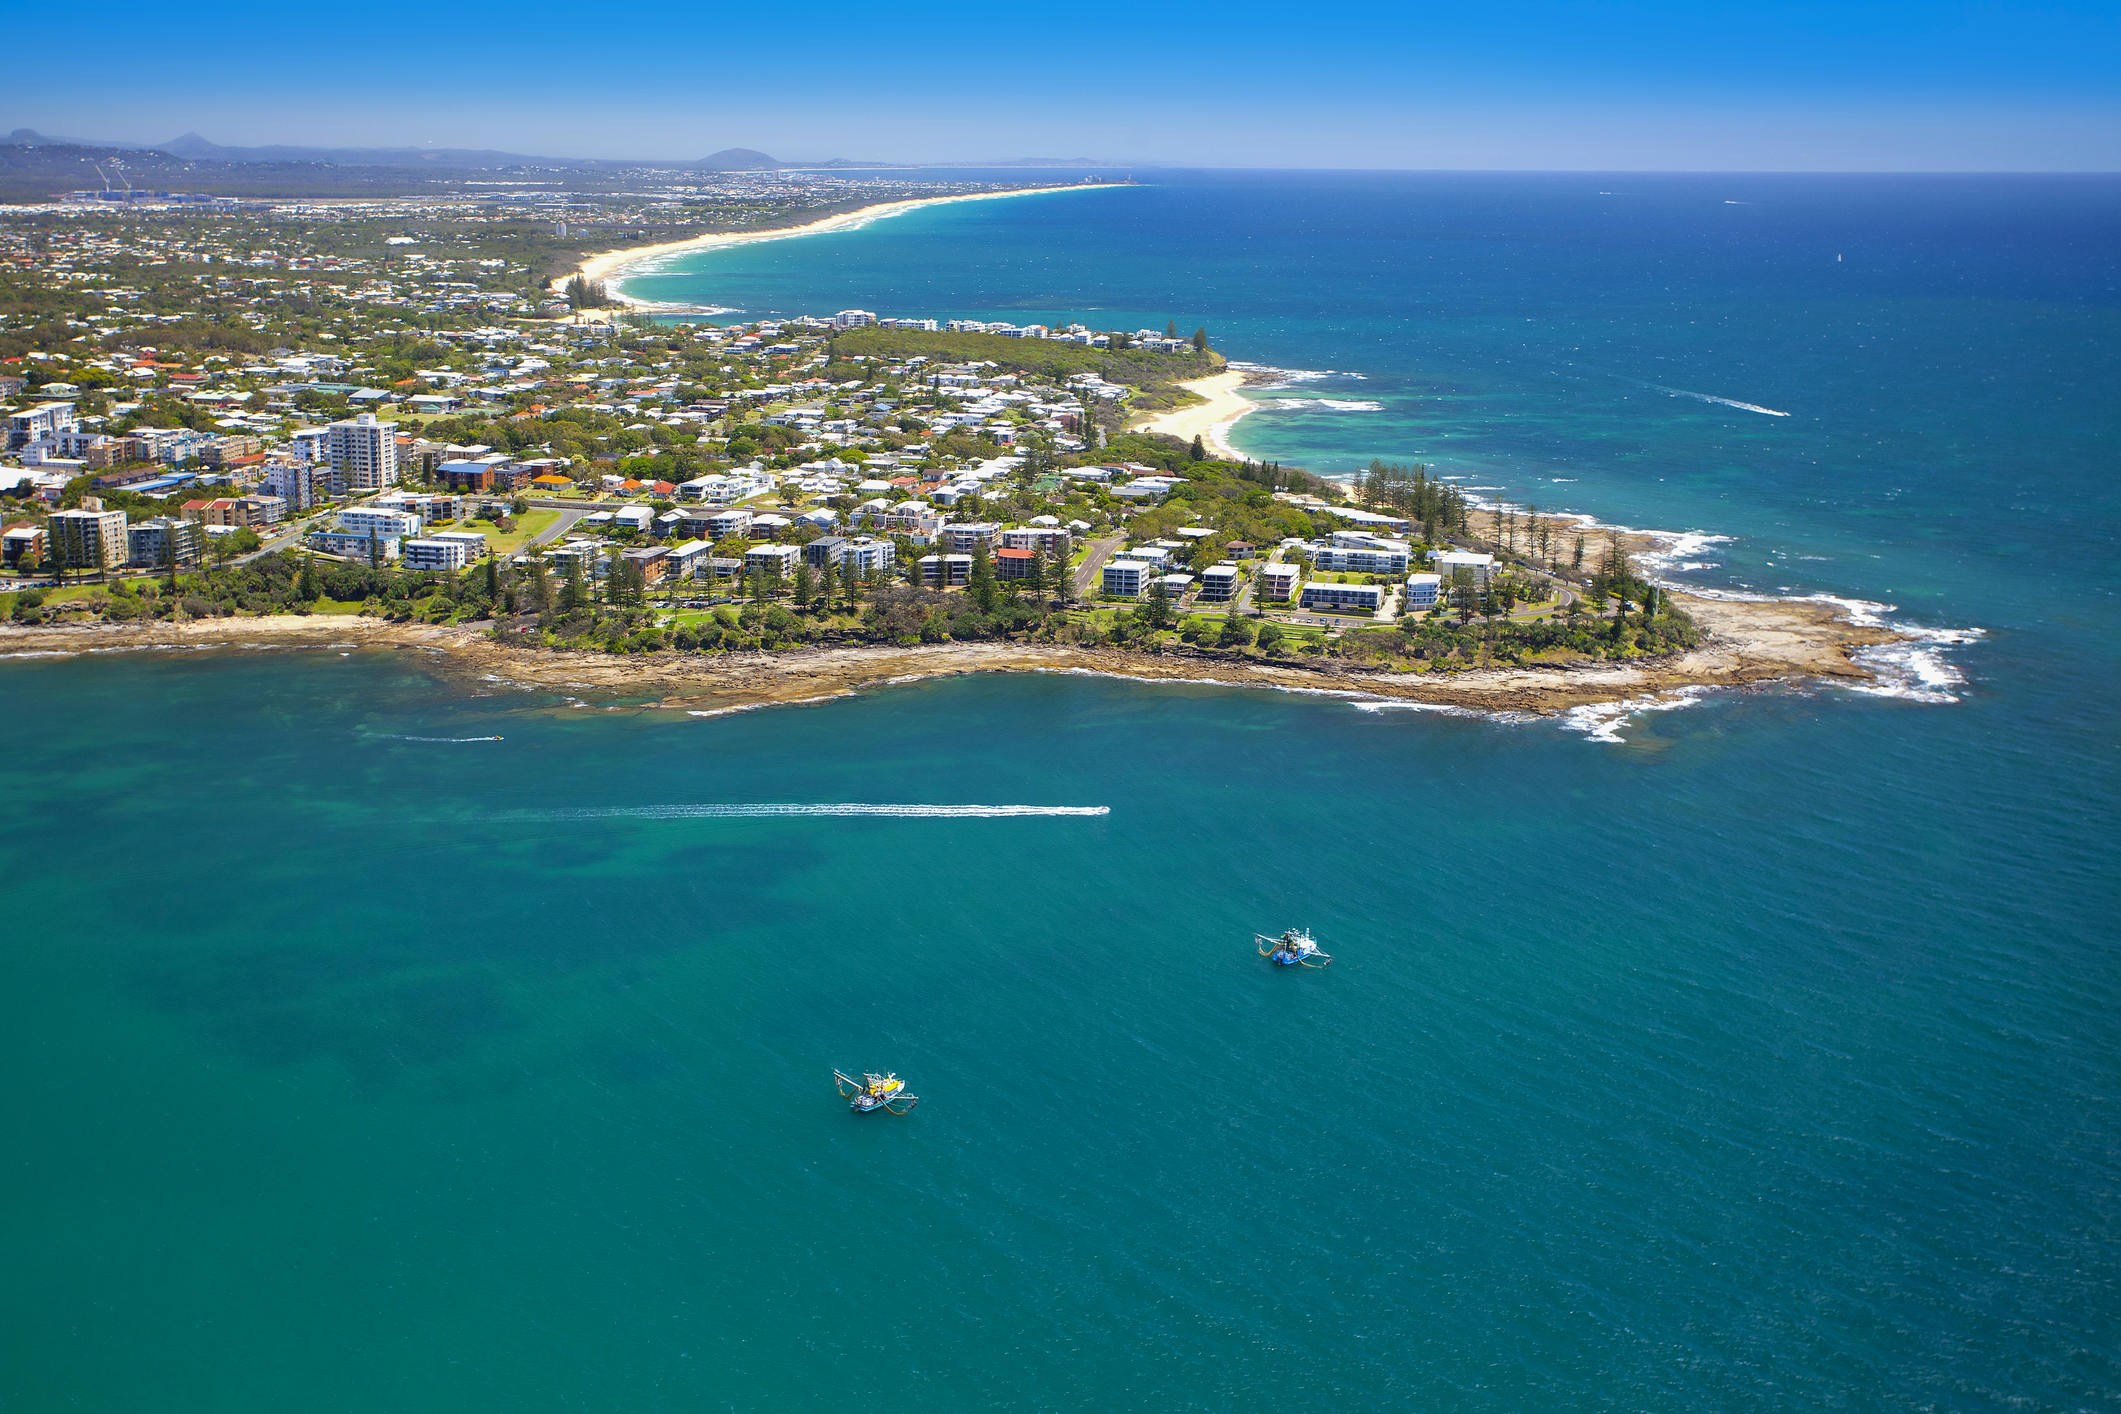 Coast still the hottest place for Australians making a move